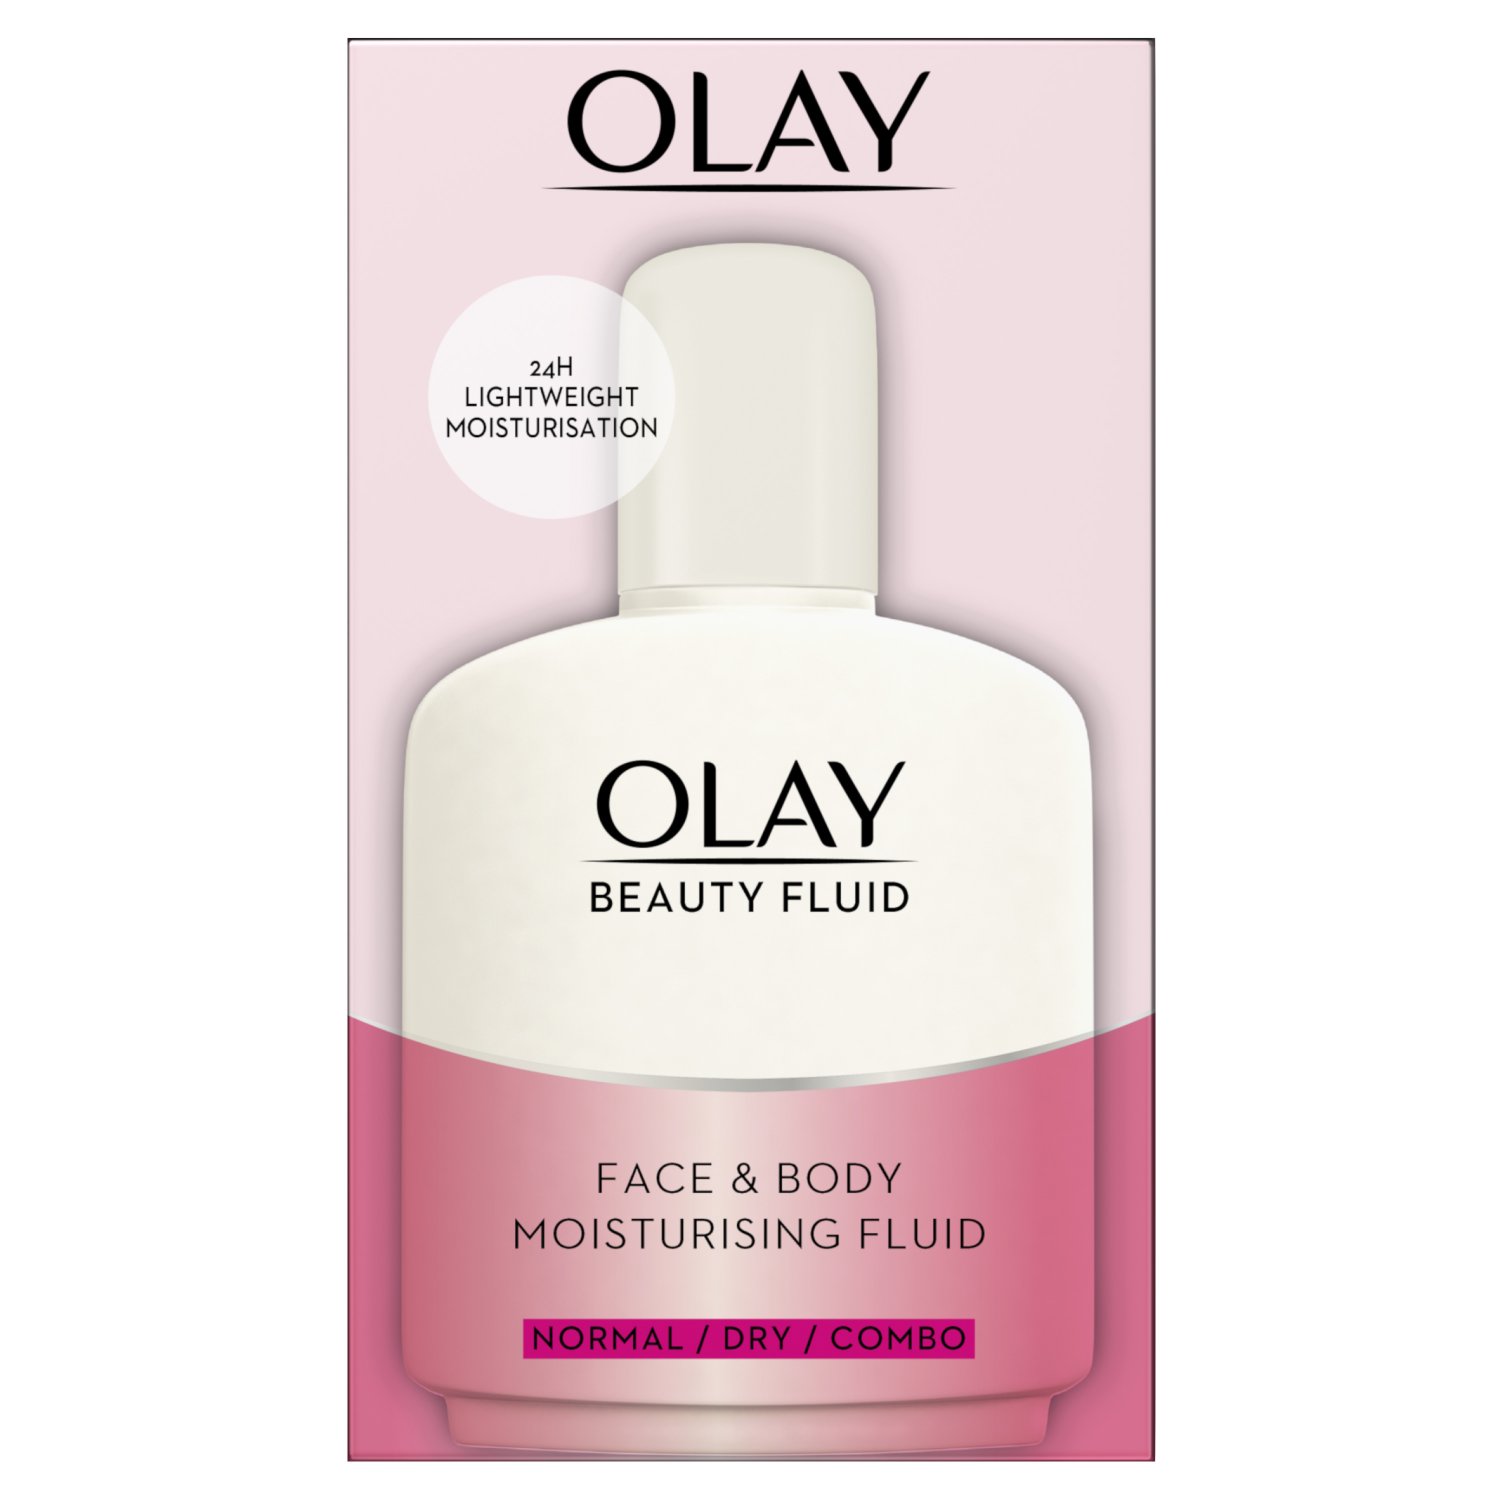 Enjoy 24 hours of daily hydration for soft and smooth skin with Olay Beauty Fluid. It's our iconic Beauty classic for younger-looking skin. Combining unique fluids with moisture-rich nutrients, it locks in natural moisture without leaving a film on the surface of your skin. It’s so good you can use it all over your face and body.